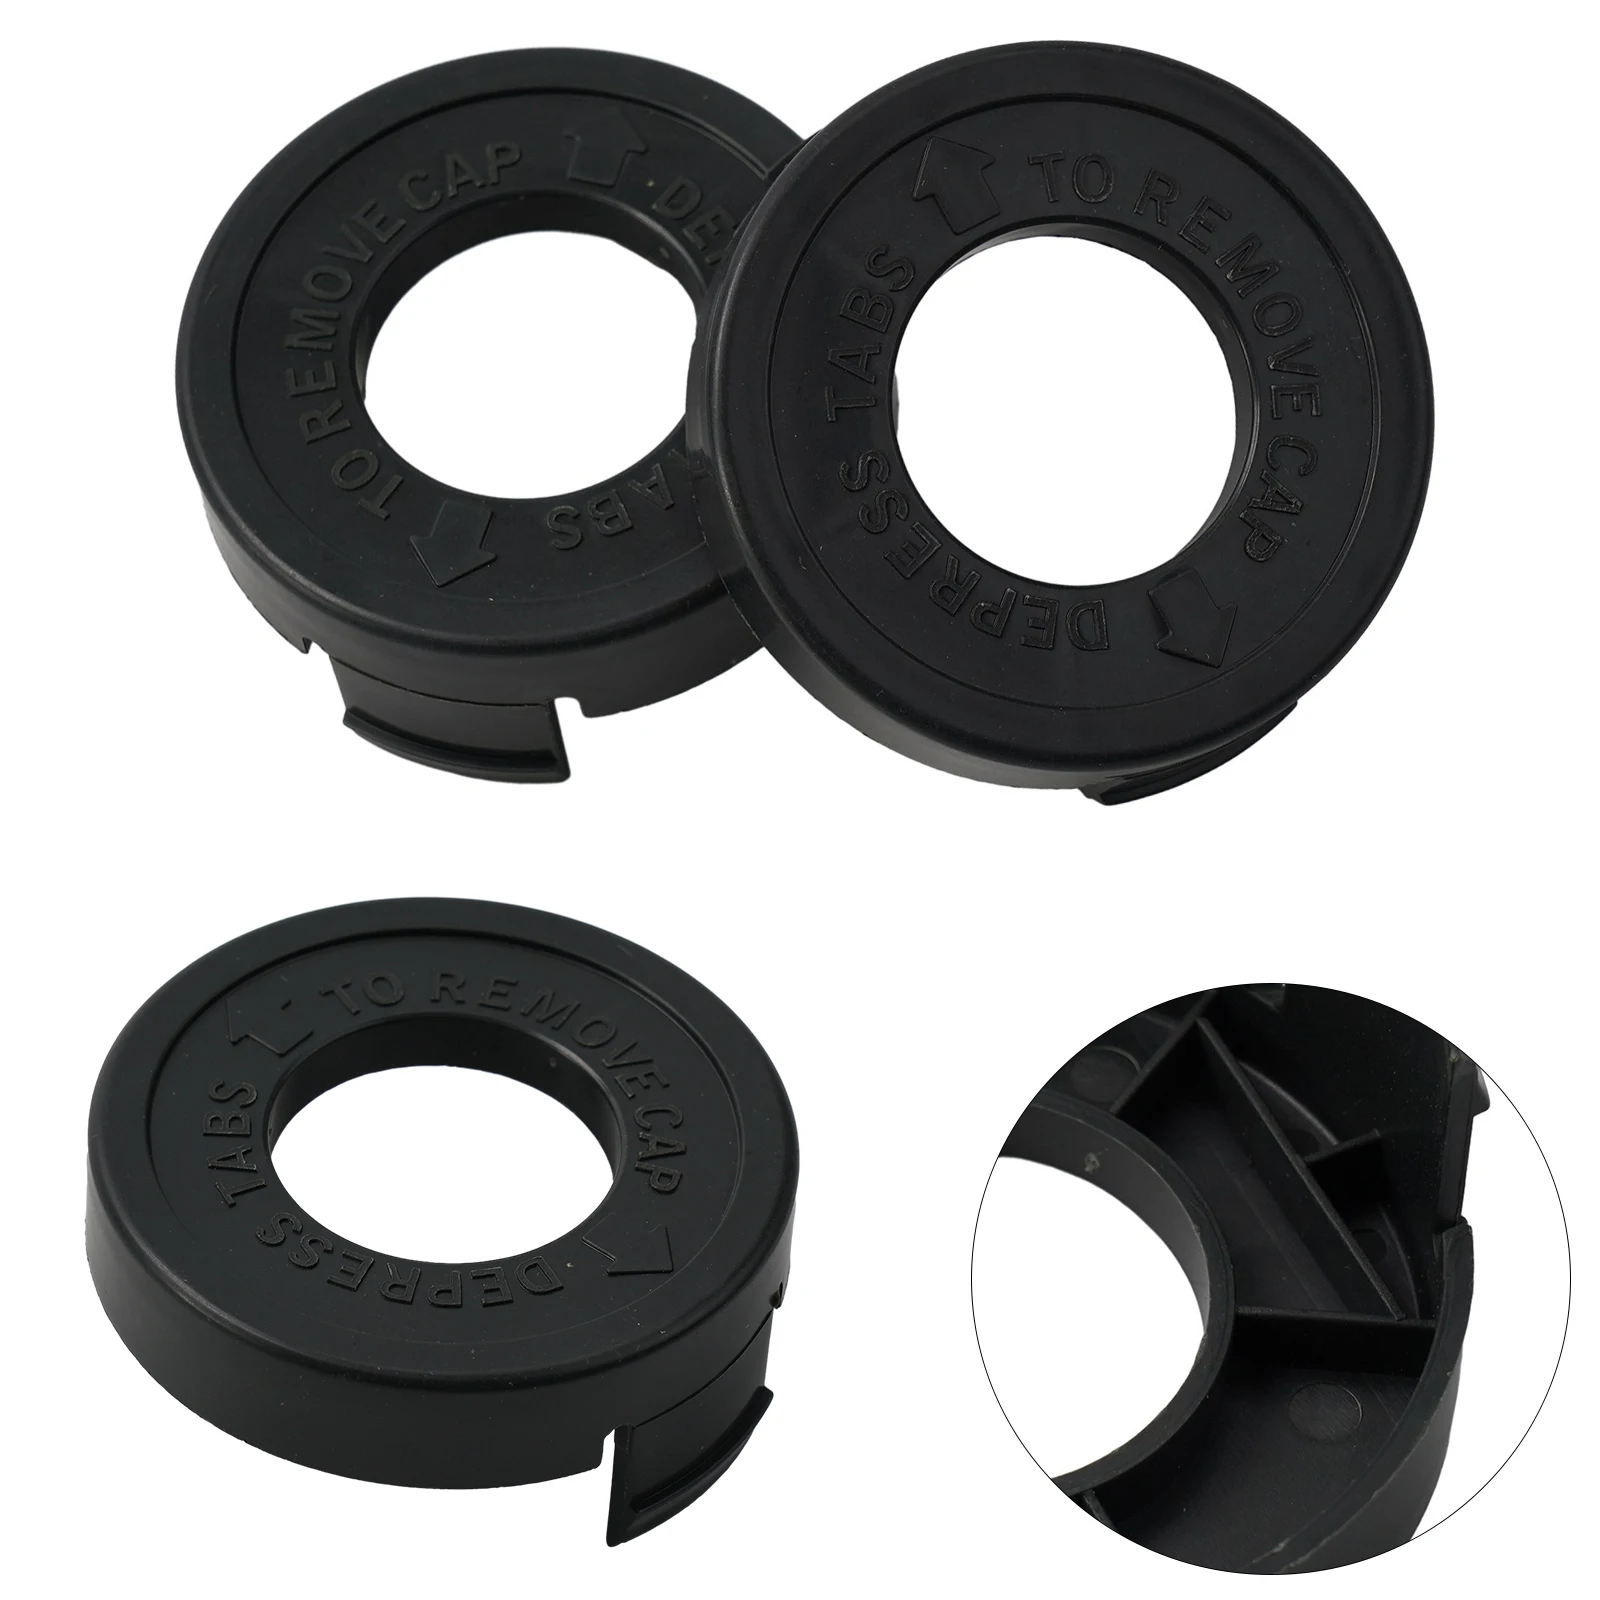 

3pcs Spool Cover For Black&Decker ST4500 Lawn Mower Parts Replacement String Trimmer Bump Cap Garden Tool Accessories